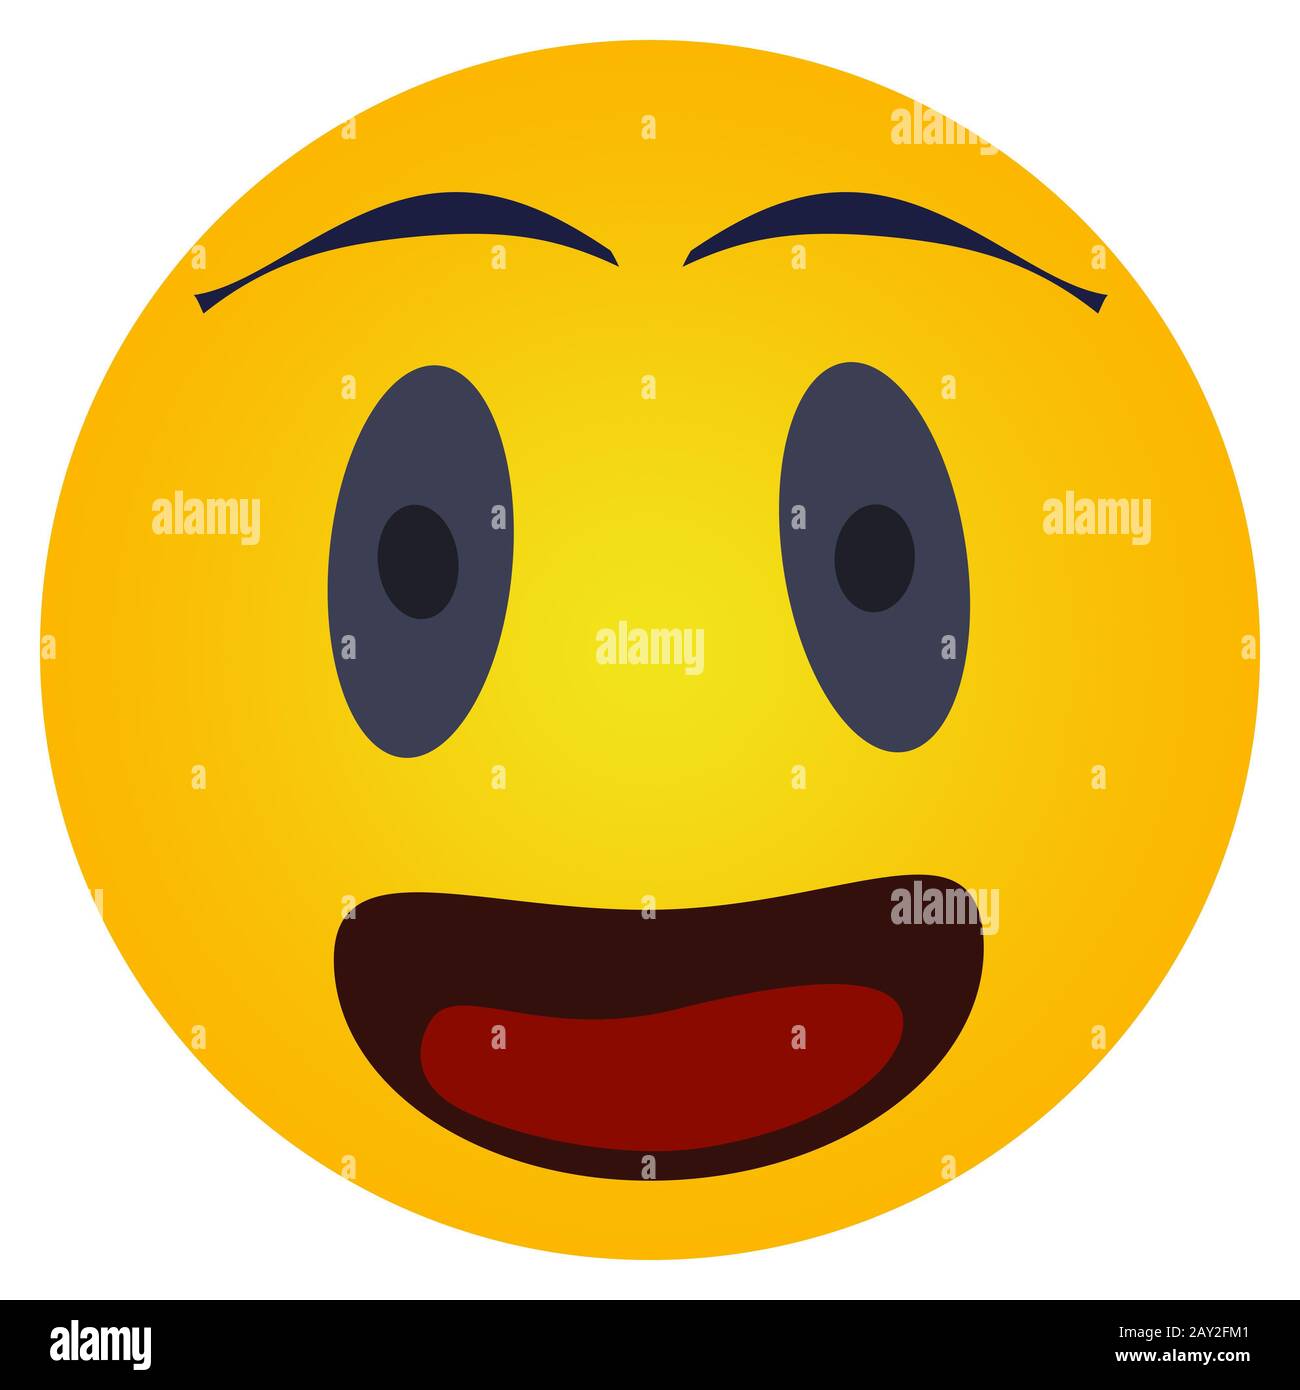 Emoticon round icon, happy facial expression with a straight look. Illustration of joyful expression of human face in the form of icon. Stock Photo